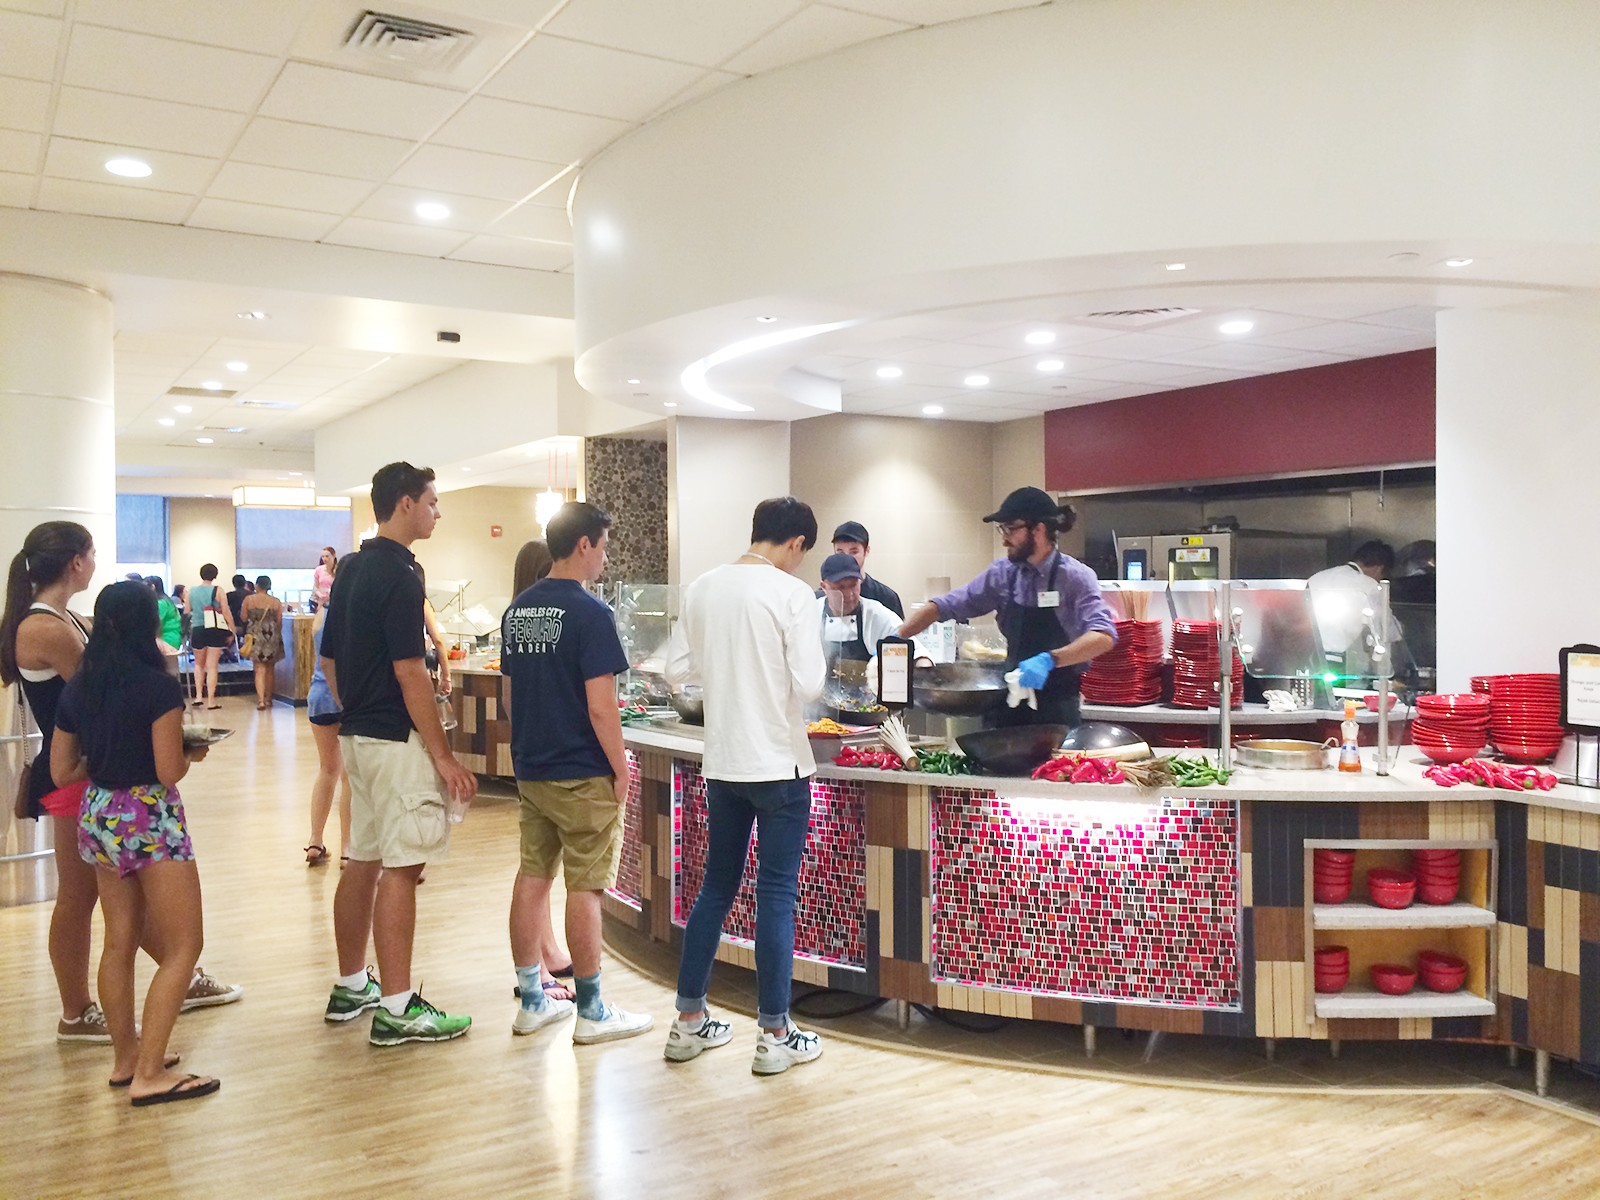 Warren Dining Hall has undergone significant renovations, including a gluten-free station and an authentic asian cuisine station. PHOTO BY MAE DAVIS/DAILY FREE PRESS STAFF